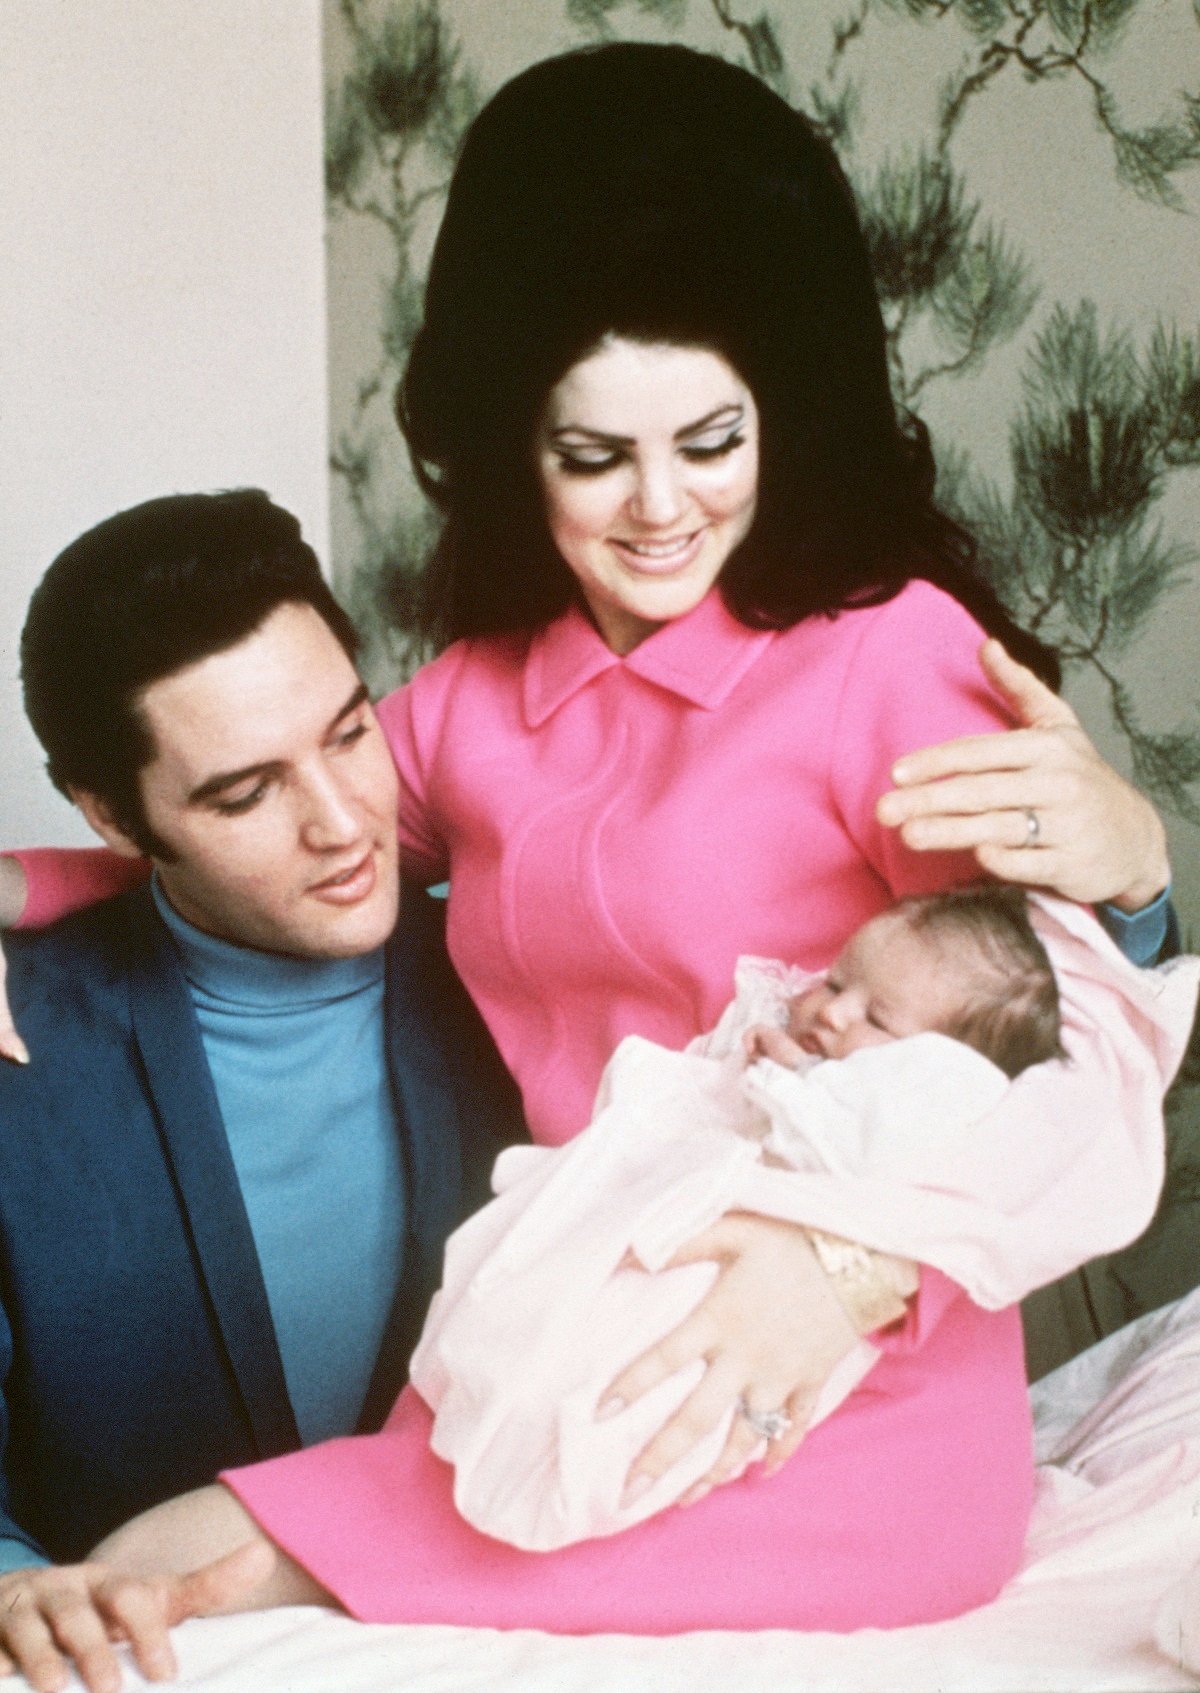 Elvis Presley and his wife, Priscilla, prepare to leave the hospital with their new daughter, Lisa Marie. They are smiling down at their new baby. Hospital in Memphis, Tennessee, February 5, 1968